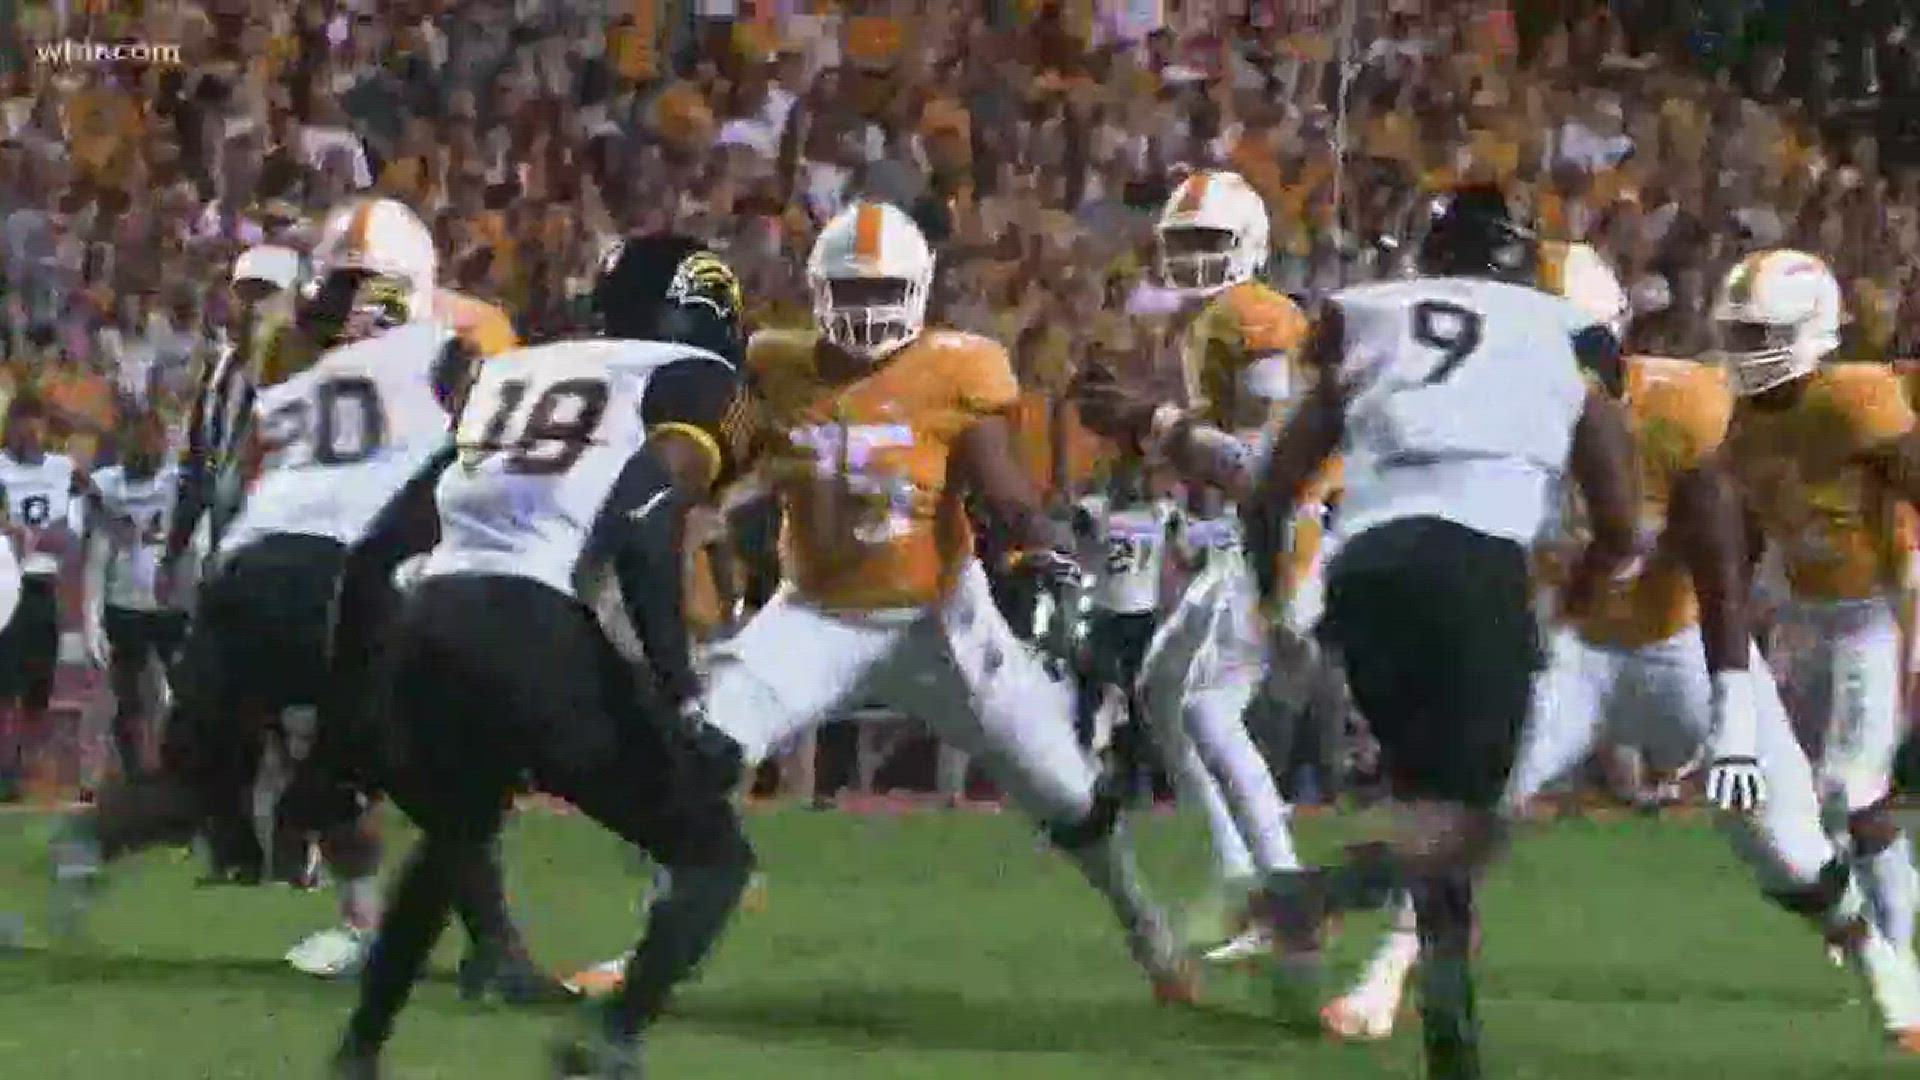 The Tigers high-scoring offense will pose a challenge for the struggling Vols, but Tennessee could exploit their defense for some points of their own.